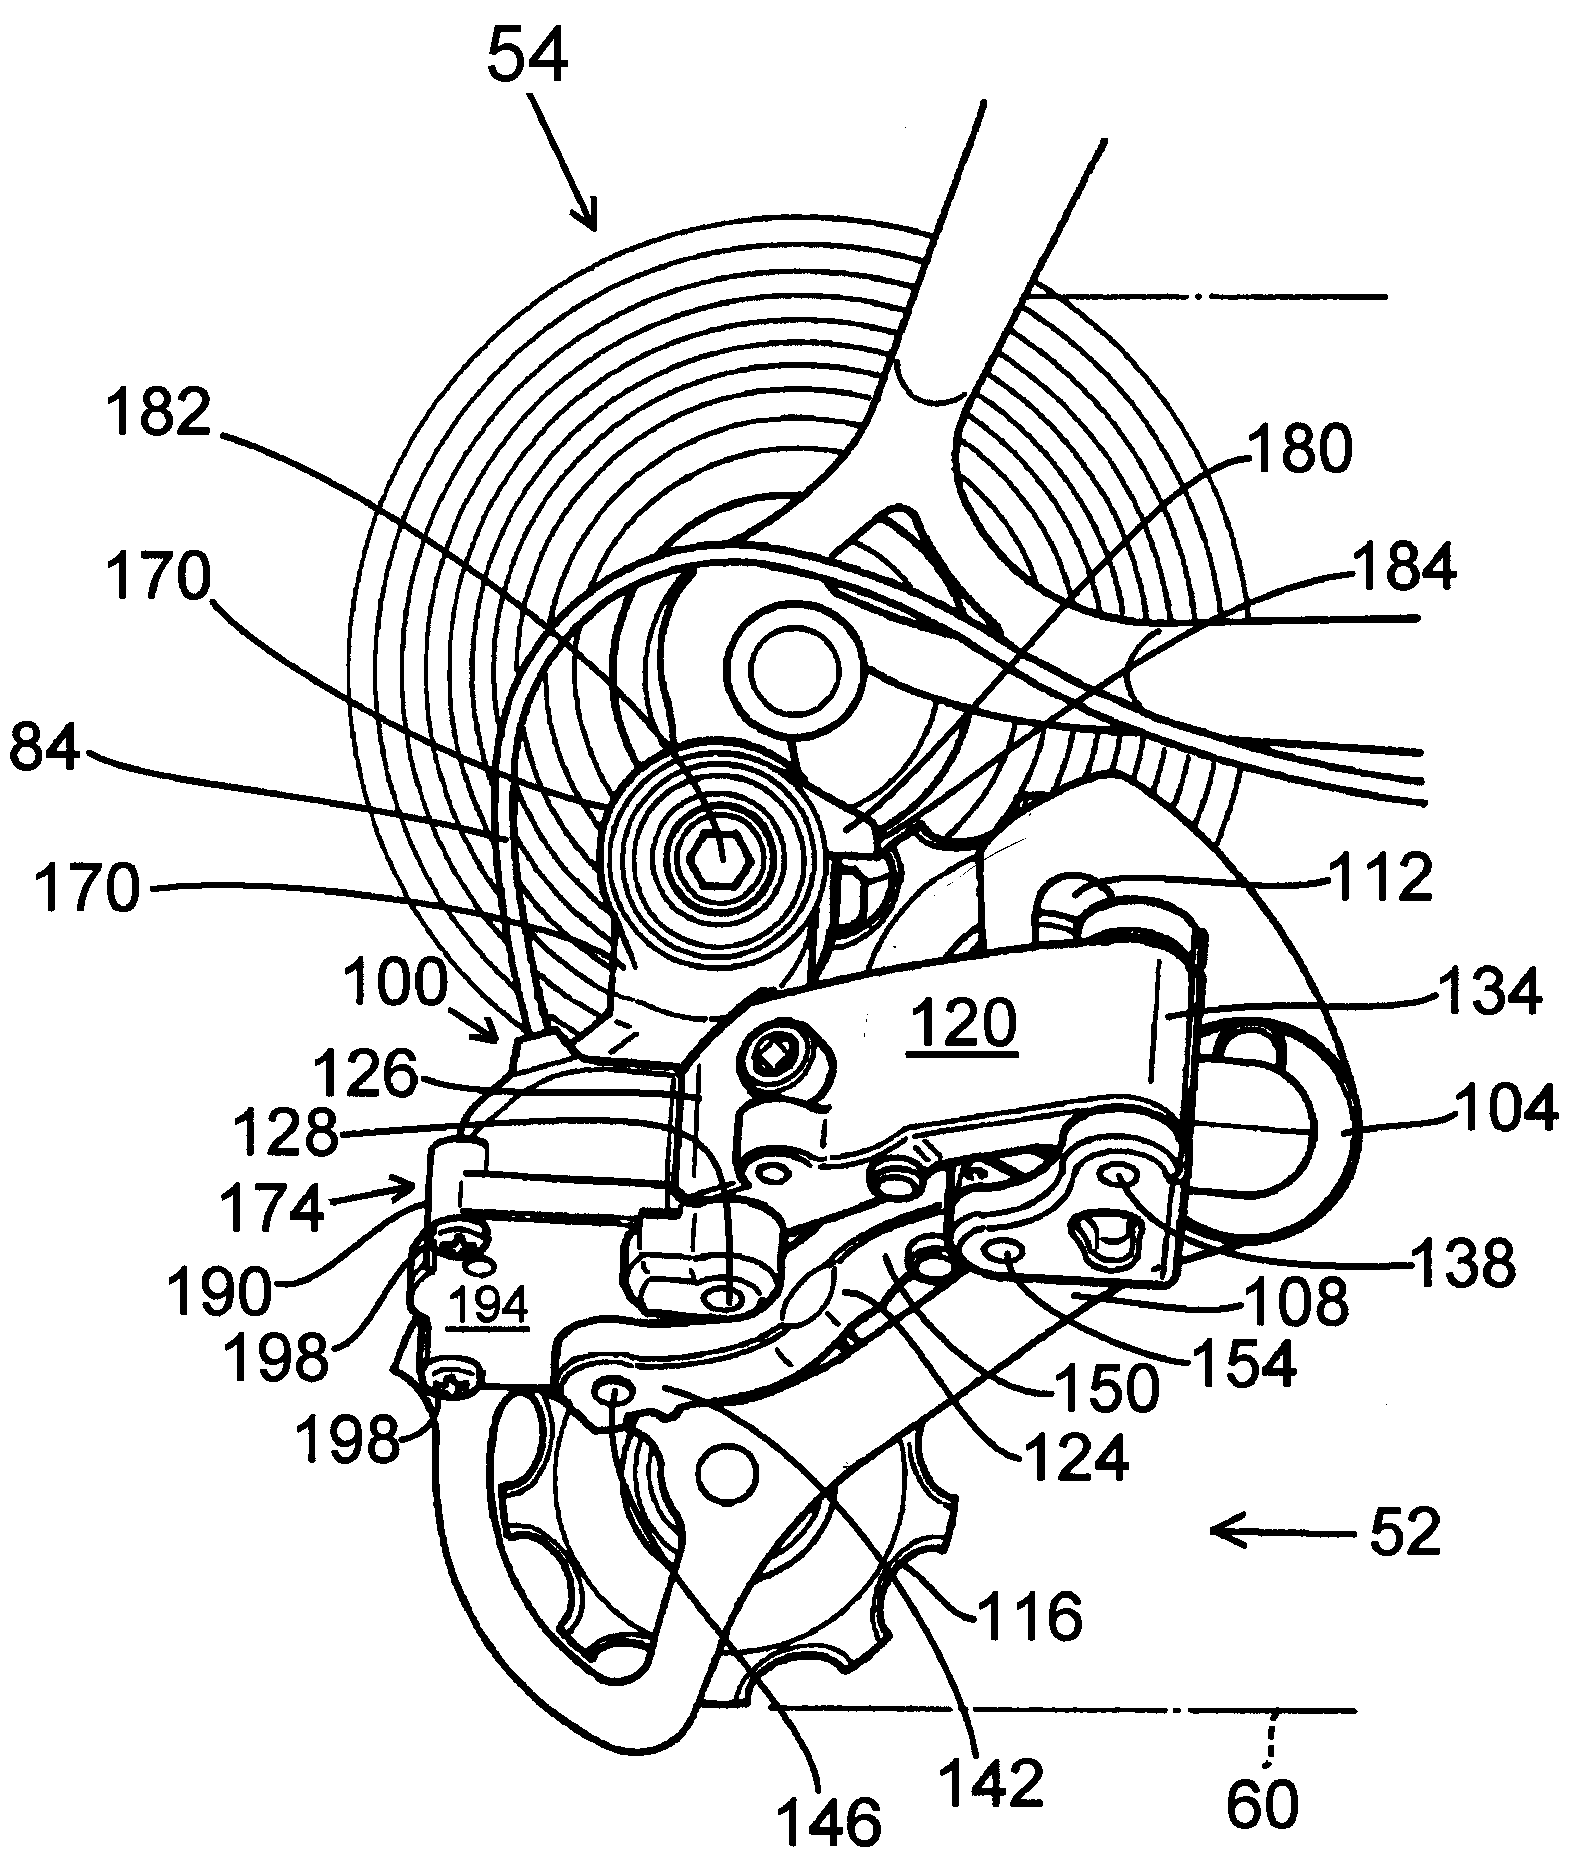 Bicycle derailleur with a motor disposed within a linkage mechanism